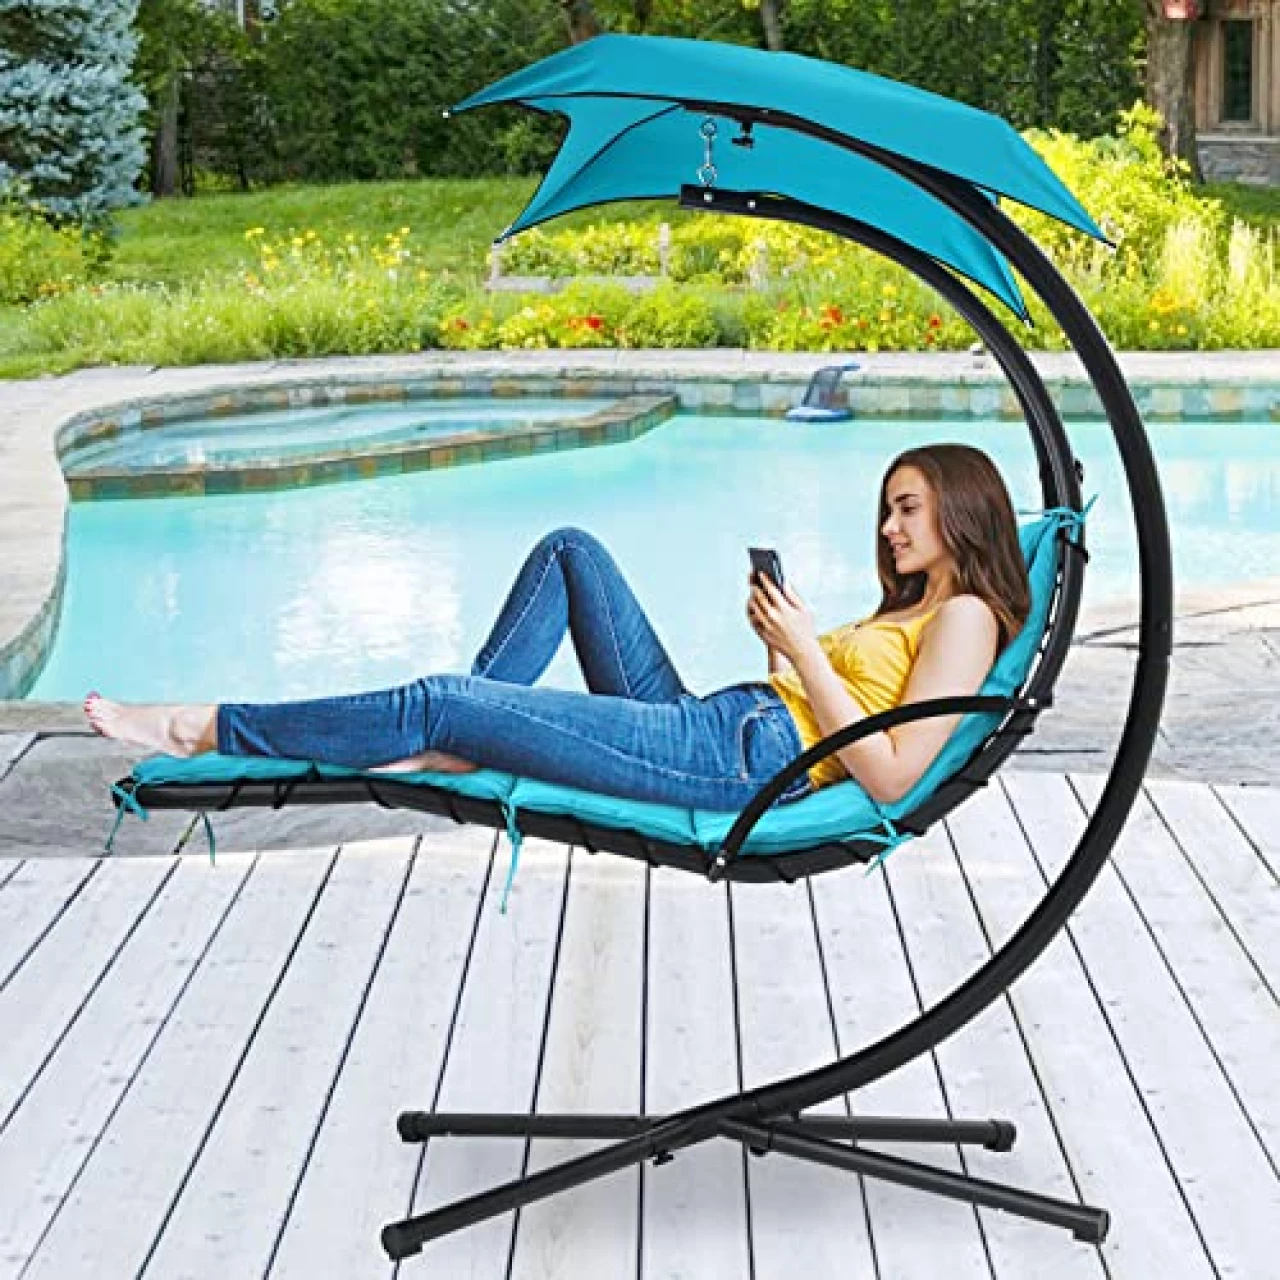 Hanging Curved Chaise Lounge Chair Floating Swing Patio Chair, Arc Steel Stand Hammock Chair w/Built-in Pillow, Cushion, Removable Canopy Air Porch Stand for Outdoor Indoor, 330-Pound Capacity - Blue